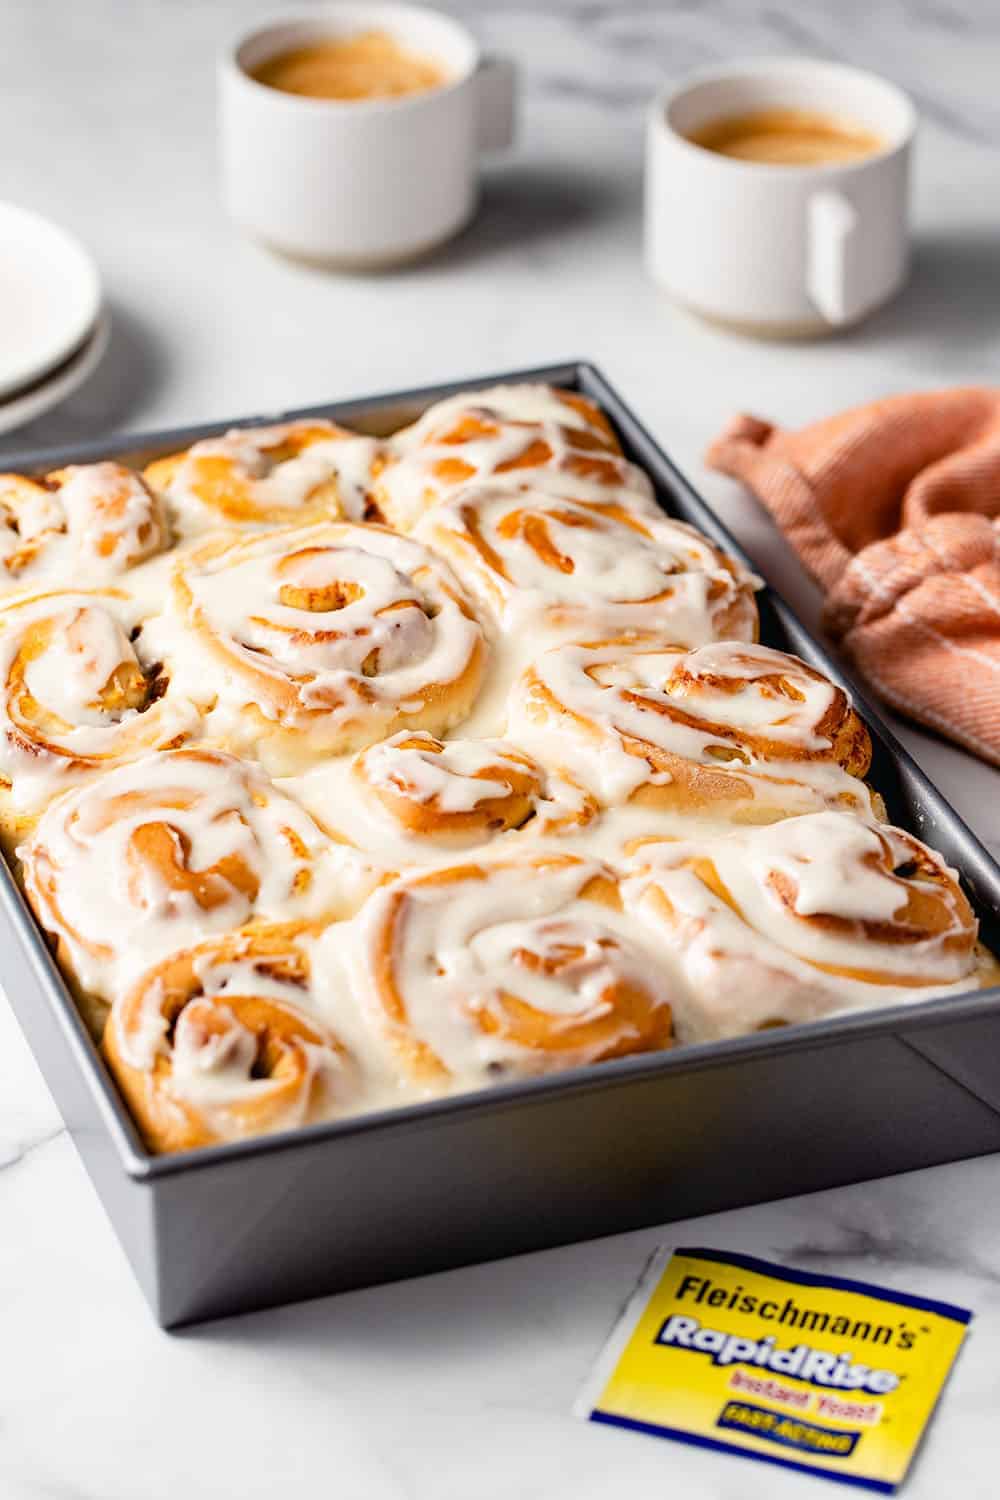 How To Make Cinnamon Rolls - The Spice House